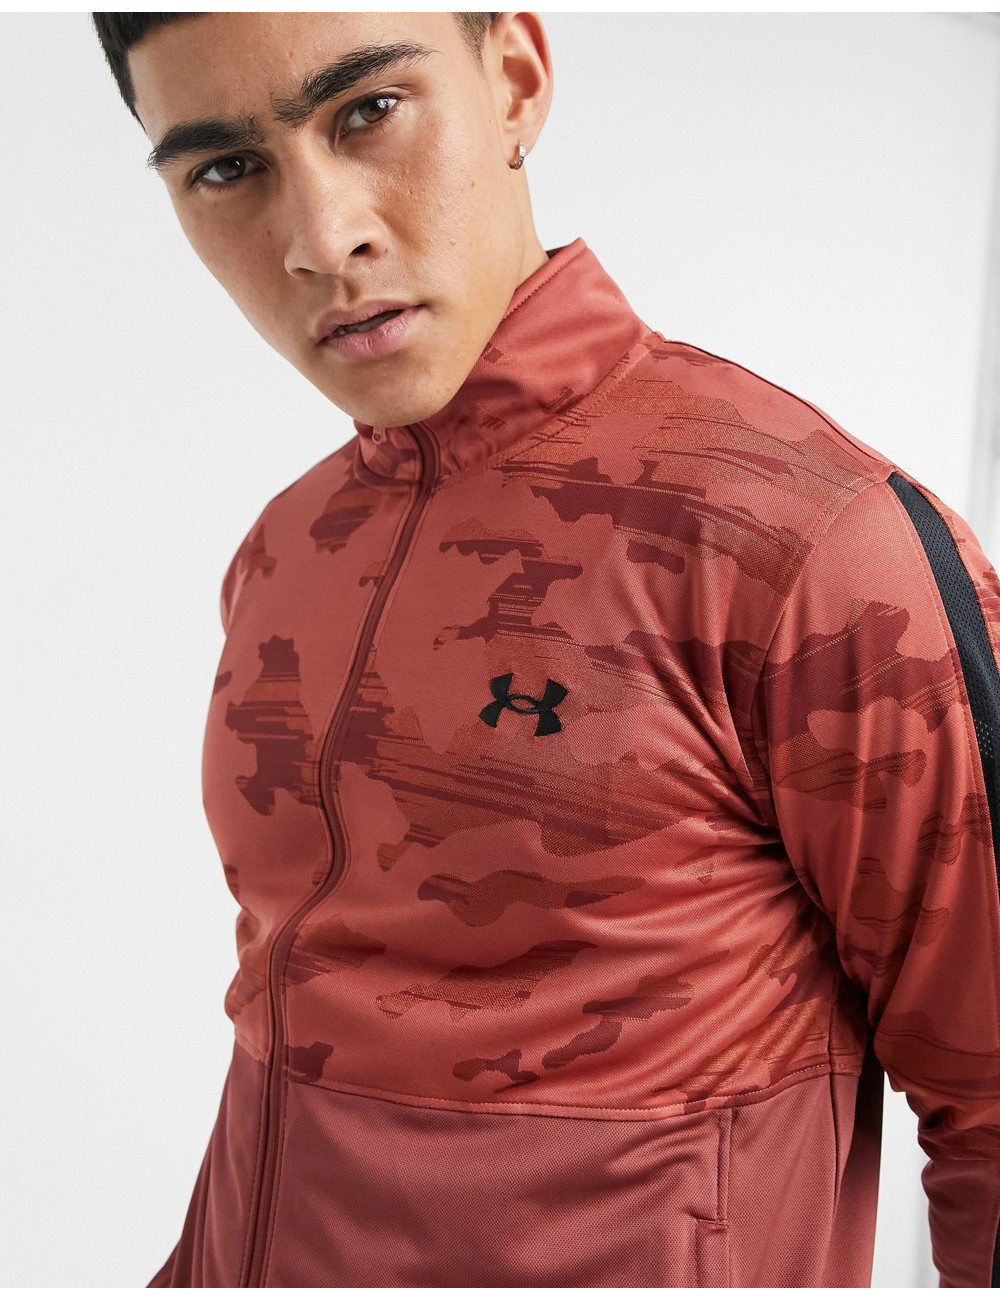 Under Armour jacket in red